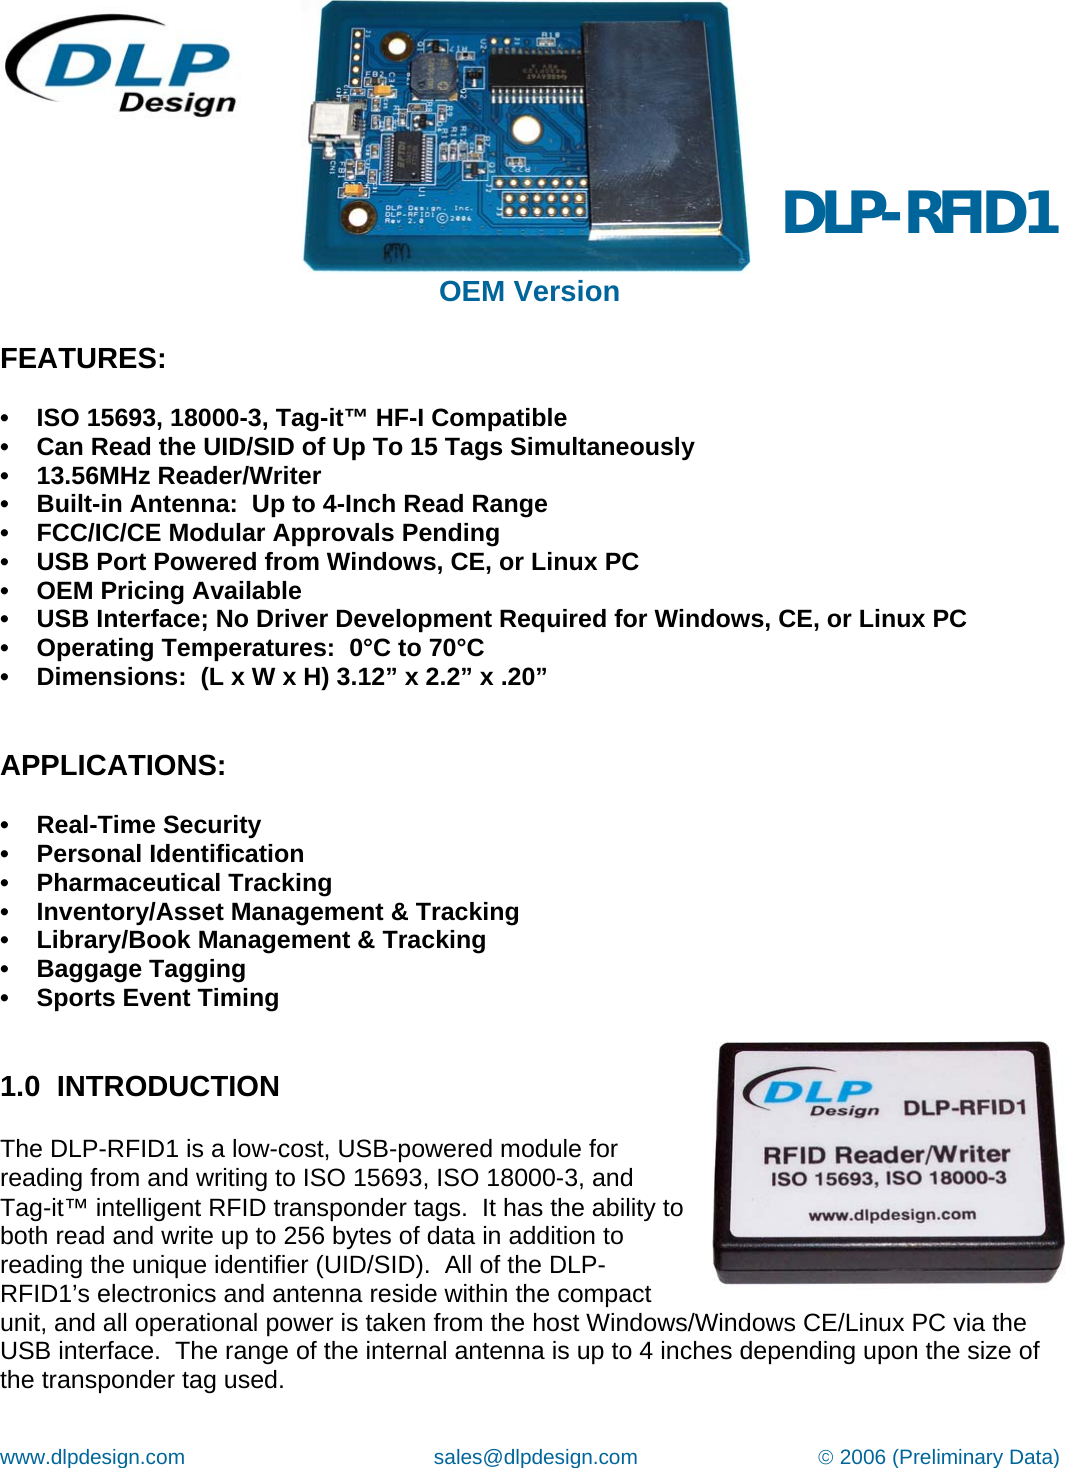 www.dlpdesign.com                                           sales@dlpdesign.com                               © 2006 (Preliminary Data)    OEM Version   DLP-RFID1 FEATURES:  •    ISO 15693, 18000-3, Tag-it™ HF-I Compatible •    Can Read the UID/SID of Up To 15 Tags Simultaneously •    13.56MHz Reader/Writer •    Built-in Antenna:  Up to 4-Inch Read Range  •    FCC/IC/CE Modular Approvals Pending   •    USB Port Powered from Windows, CE, or Linux PC    •    OEM Pricing Available •    USB Interface; No Driver Development Required for Windows, CE, or Linux PC •    Operating Temperatures:  0°C to 70°C  •    Dimensions:  (L x W x H) 3.12” x 2.2” x .20”   APPLICATIONS:  •    Real-Time Security •    Personal Identification •    Pharmaceutical Tracking •    Inventory/Asset Management &amp; Tracking •    Library/Book Management &amp; Tracking •    Baggage Tagging •    Sports Event Timing    1.0  INTRODUCTION  The DLP-RFID1 is a low-cost, USB-powered module for reading from and writing to ISO 15693, ISO 18000-3, and  Tag-it™ intelligent RFID transponder tags.  It has the ability to both read and write up to 256 bytes of data in addition to reading the unique identifier (UID/SID).  All of the DLP-RFID1’s electronics and antenna reside within the compact unit, and all operational power is taken from the host Windows/Windows CE/Linux PC via the USB interface.  The range of the internal antenna is up to 4 inches depending upon the size of the transponder tag used.    